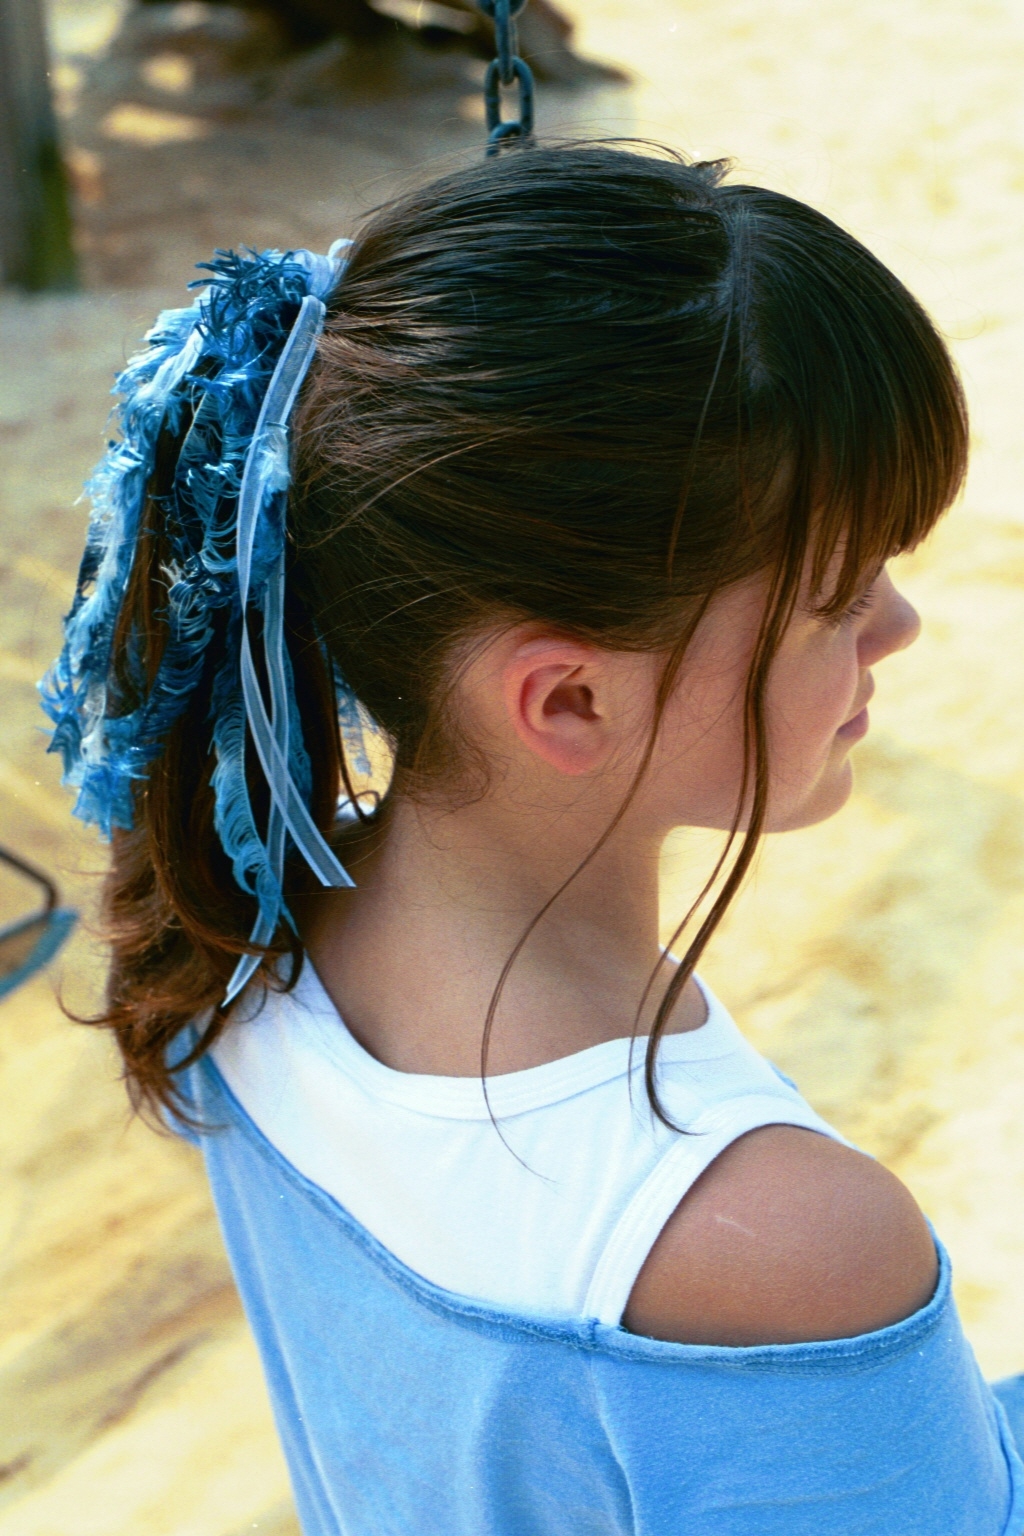 Sassy Tails® Ties Up Booming Hair Accessory Market 